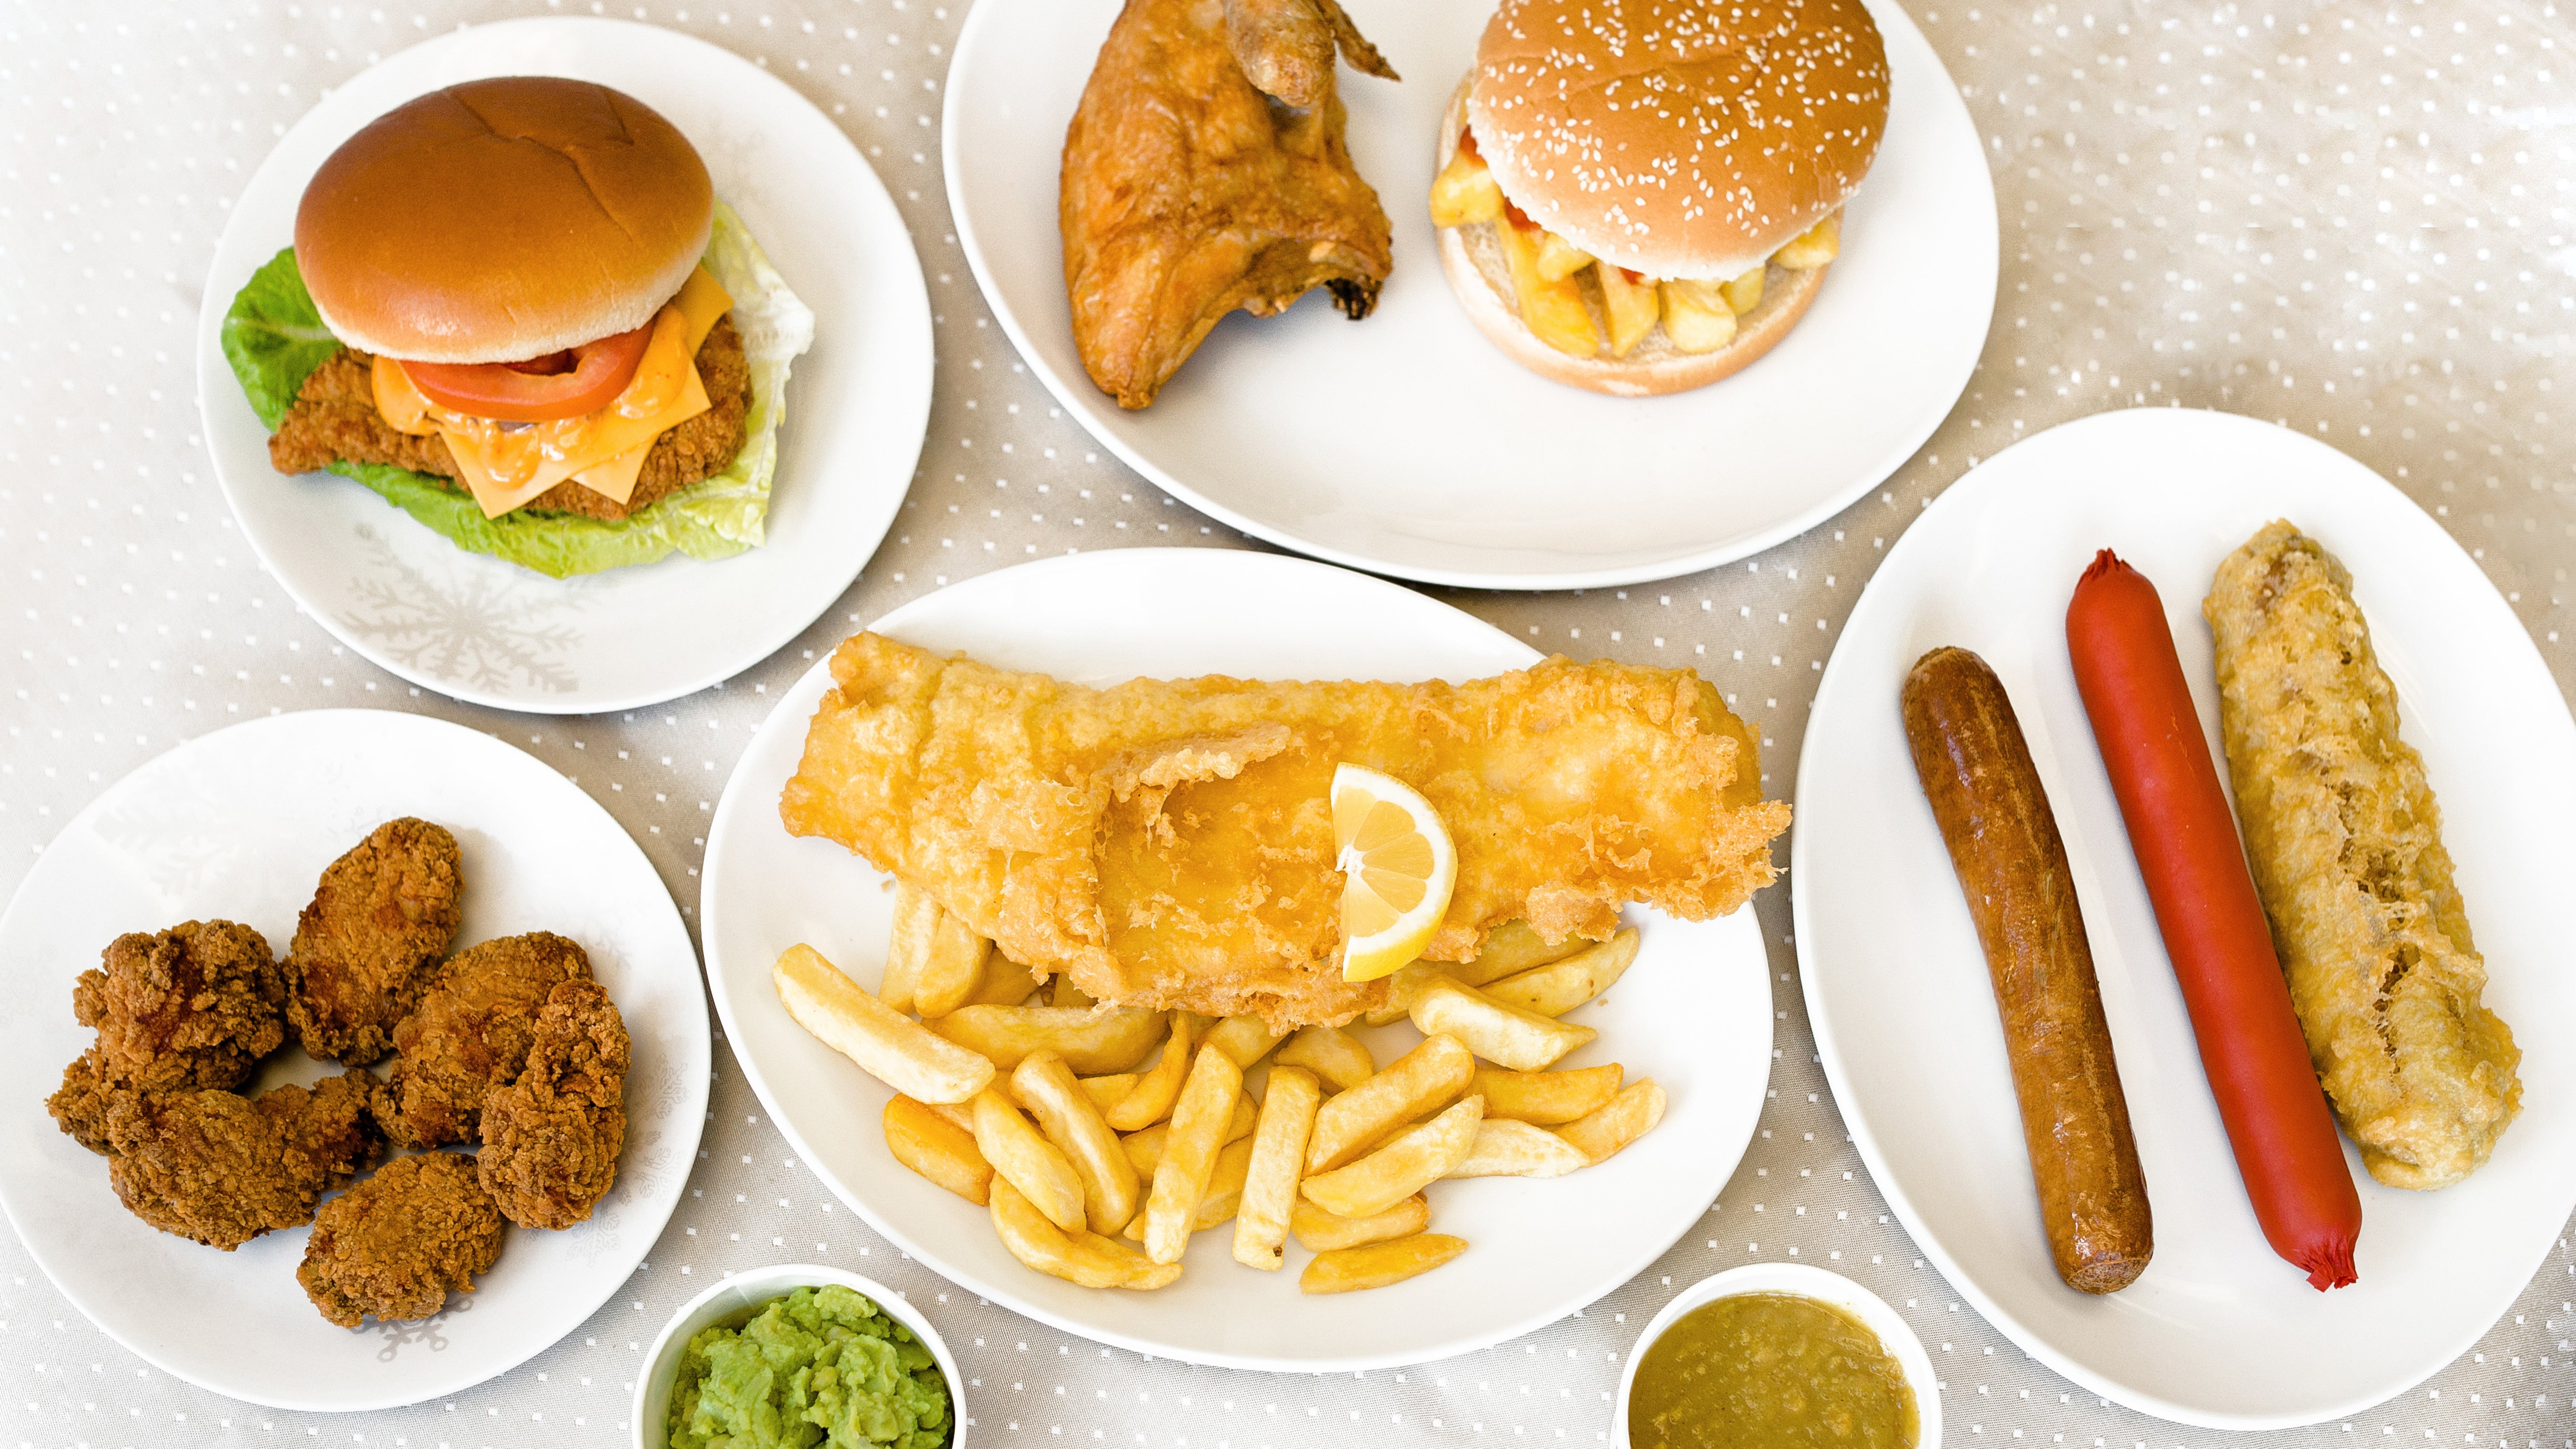 Tanzim's Traditional Fish & Chips